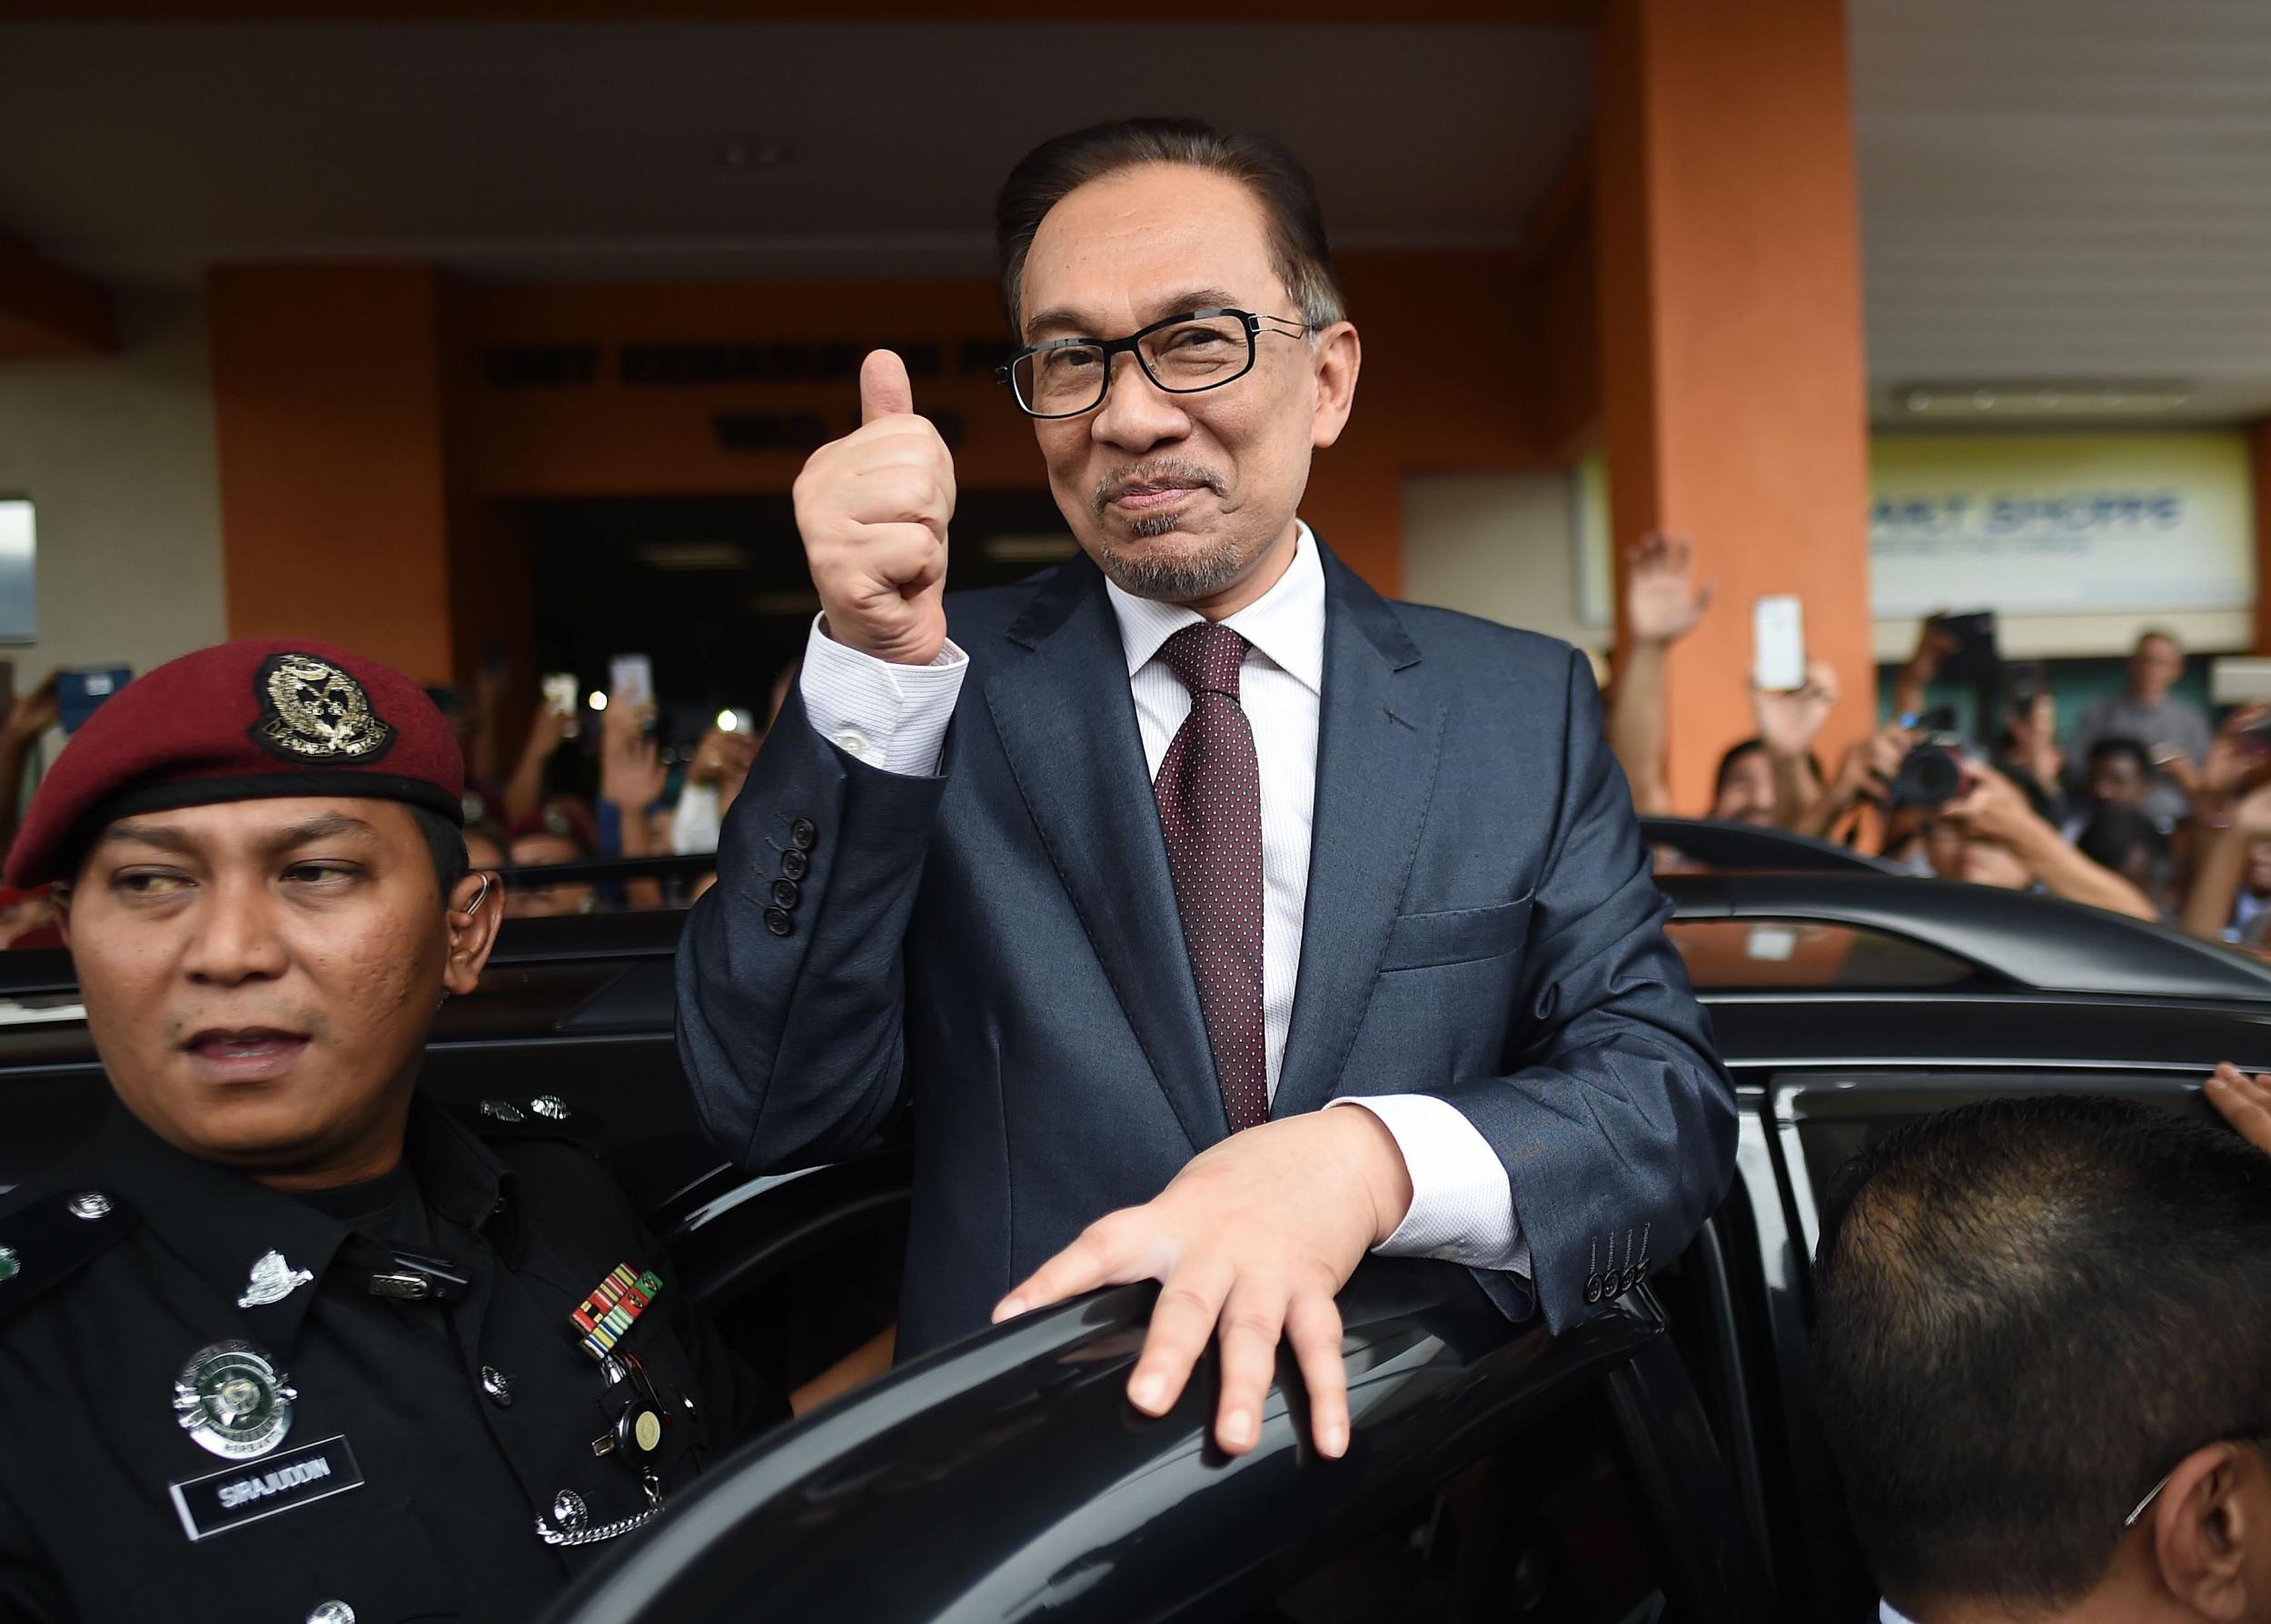 Anwar Ibrahim greets supporters after his release from detention in hospital in Kuala Lumpur on Wednesday